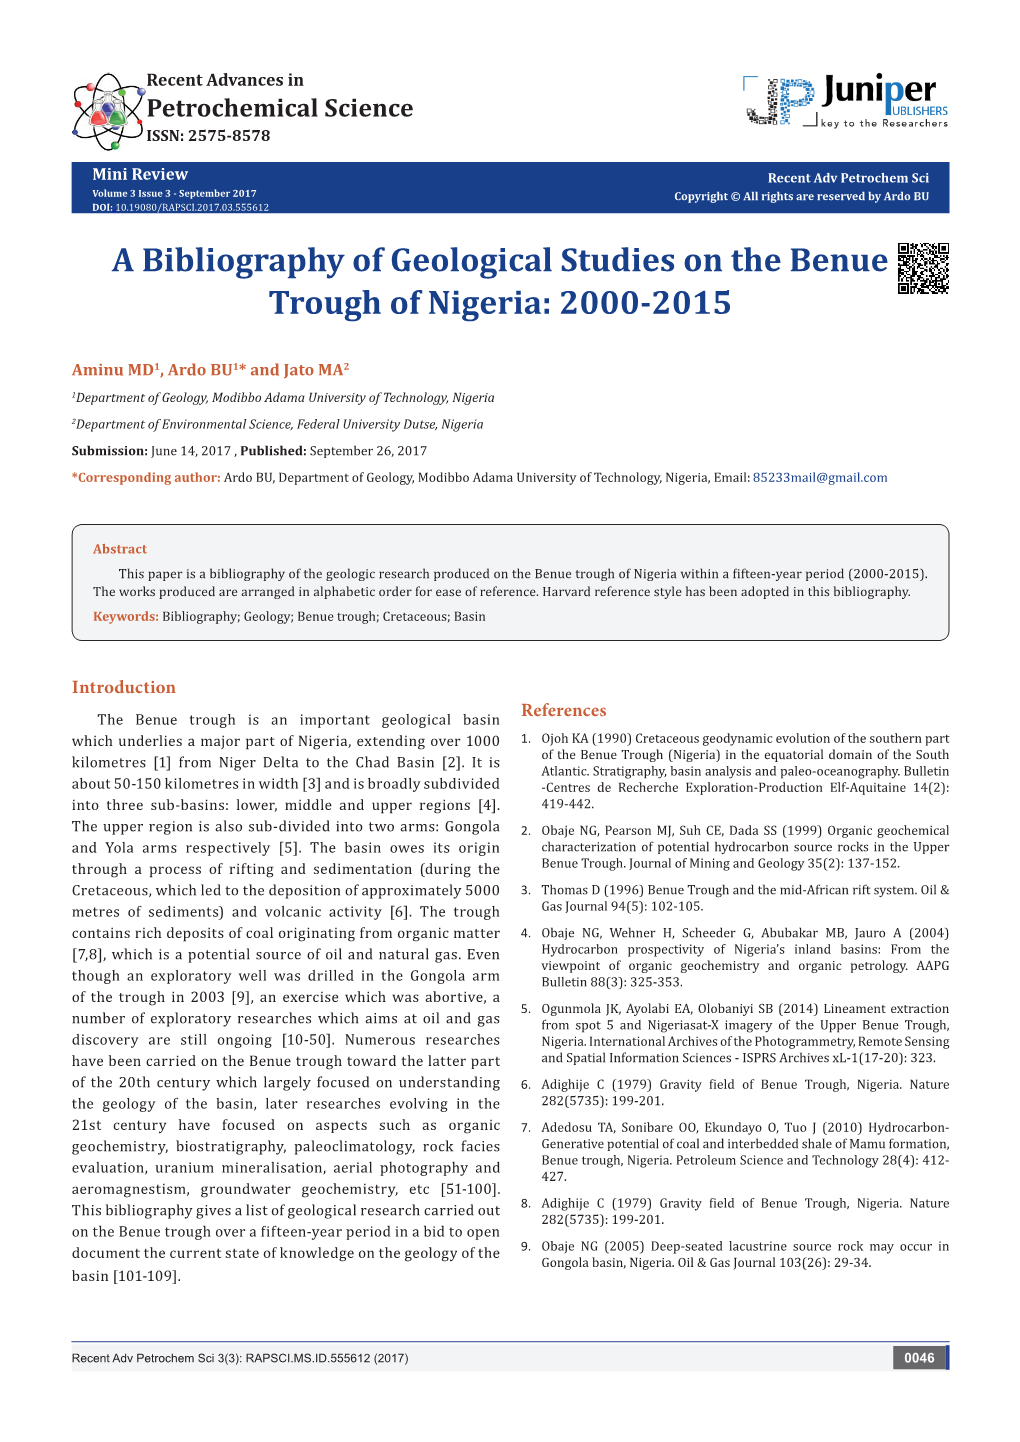 A Bibliography of Geological Studies on the Benue Trough of Nigeria: 2000-2015